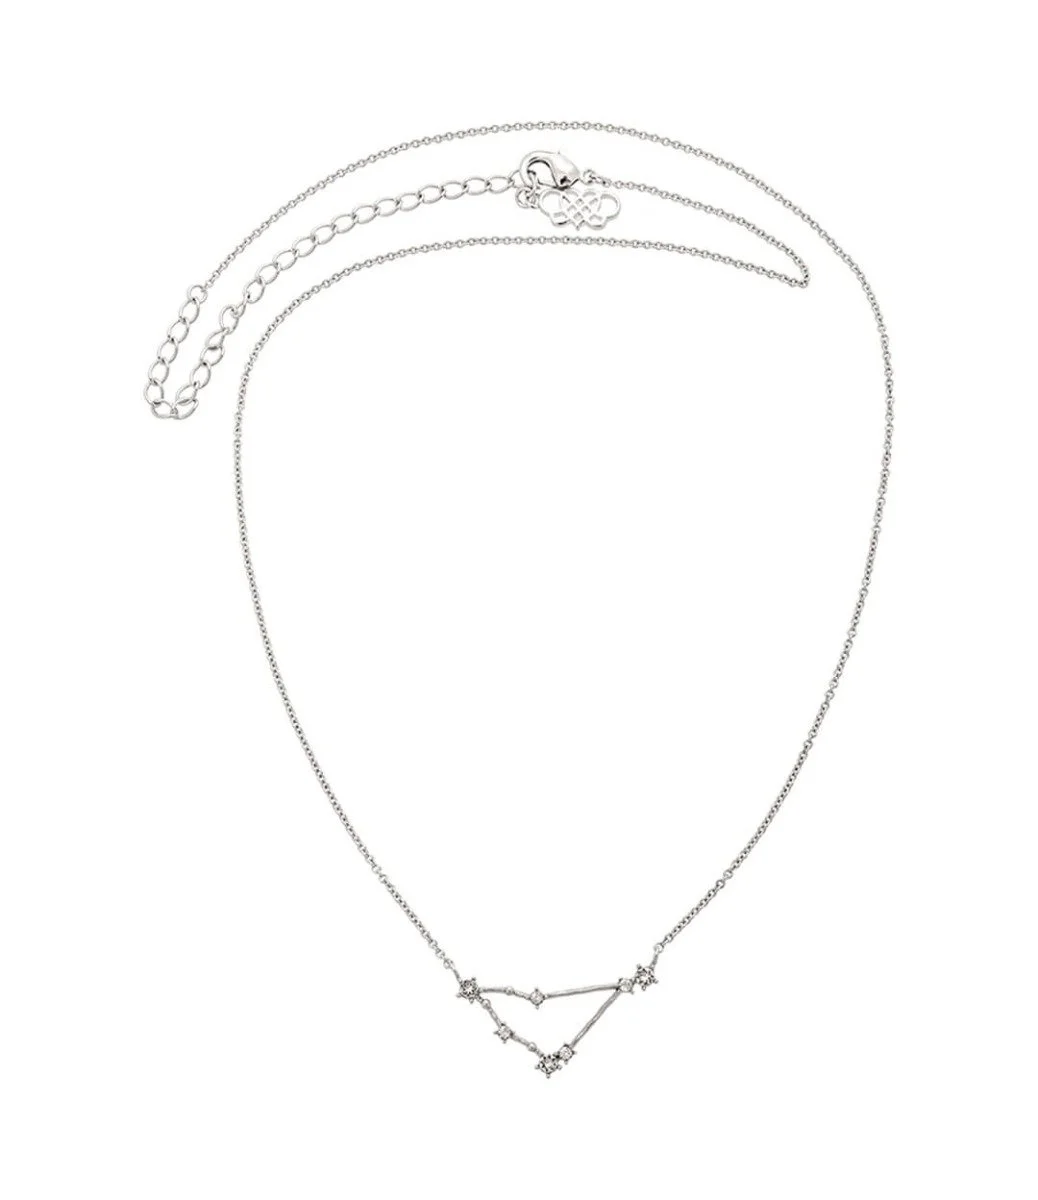 Capricorn Star Sign Necklace - Silver By Lily & Rose